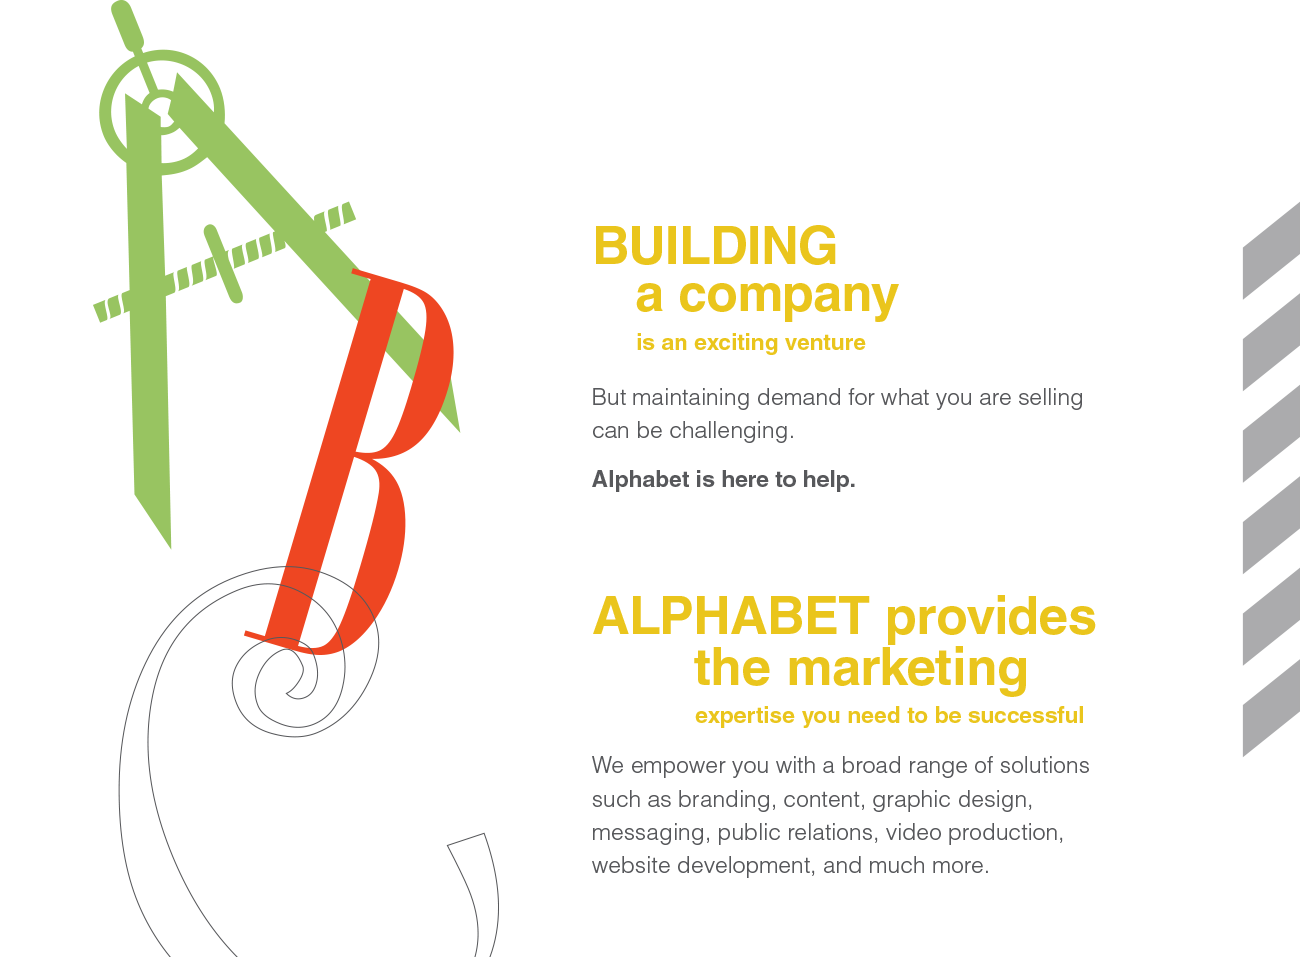 BUILDING a company is an exciting venture But maintaining demand for what you are selling can be challenging. Alphabet is here to help. ALPHABET provides the marketing expertise you need to be successful We empower you with a broad range of solutions such as branding, content, graphic design, messaging, public relations, video production, website development, and much more.